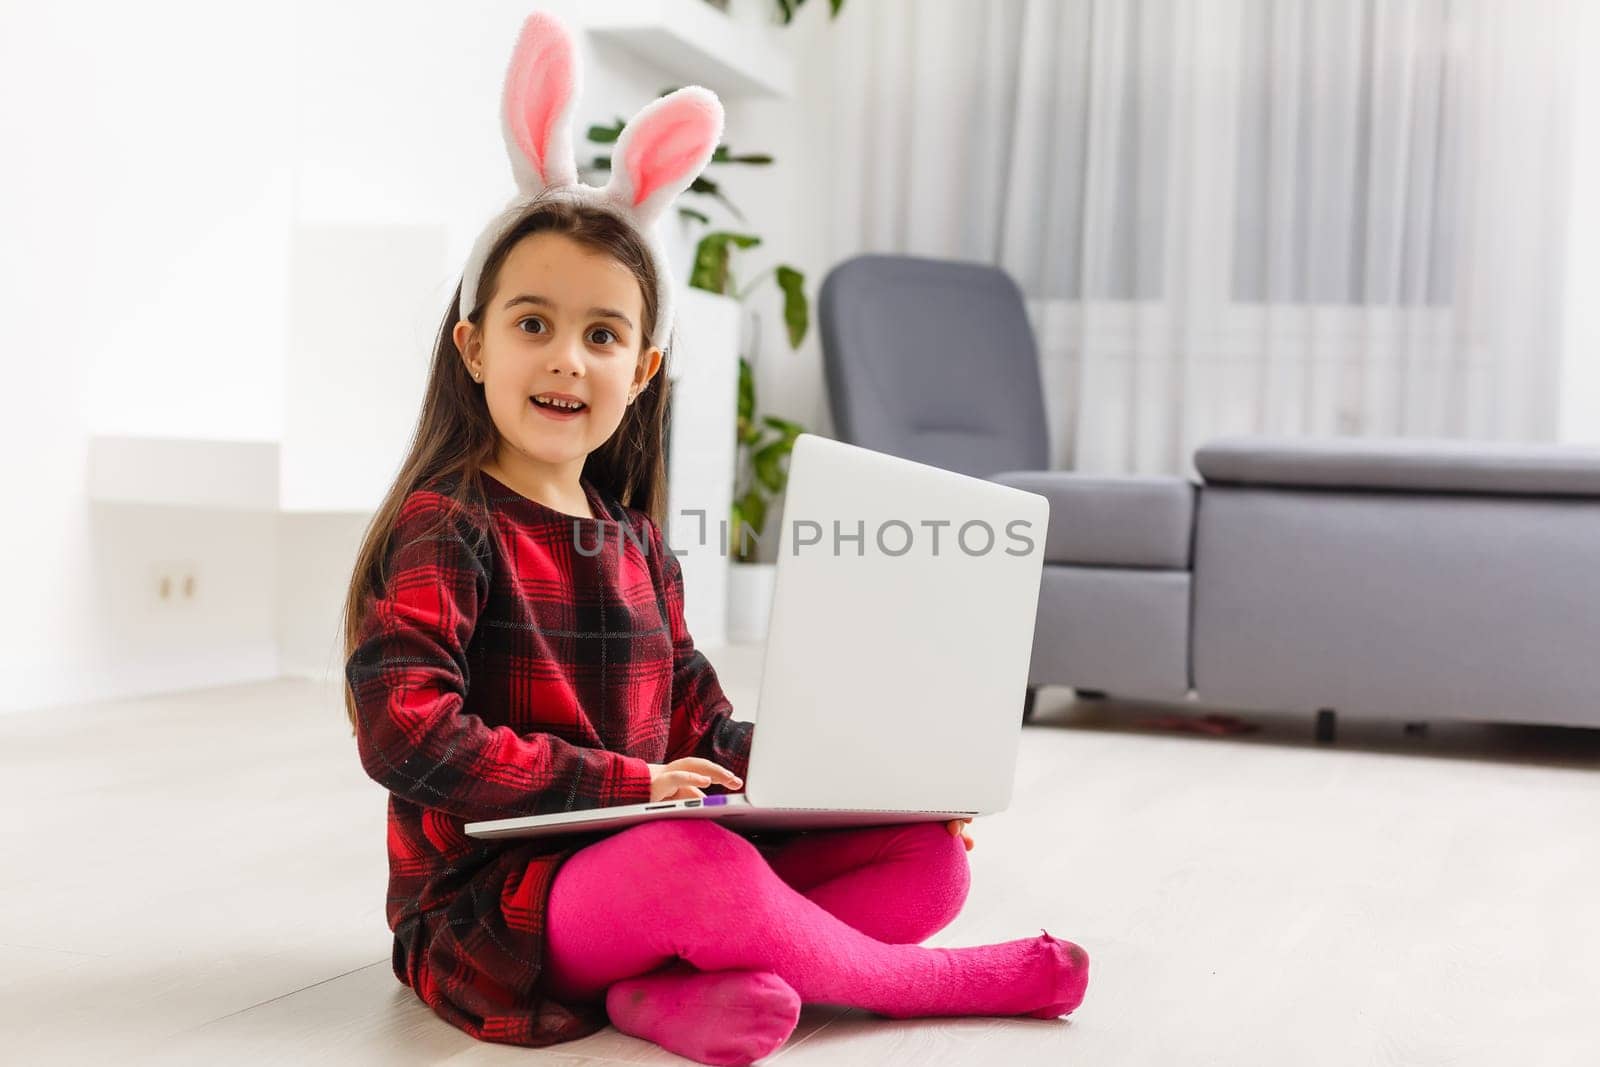 Little girl with her bunny using computer together preparing for easter-shallow depth of field by Andelov13